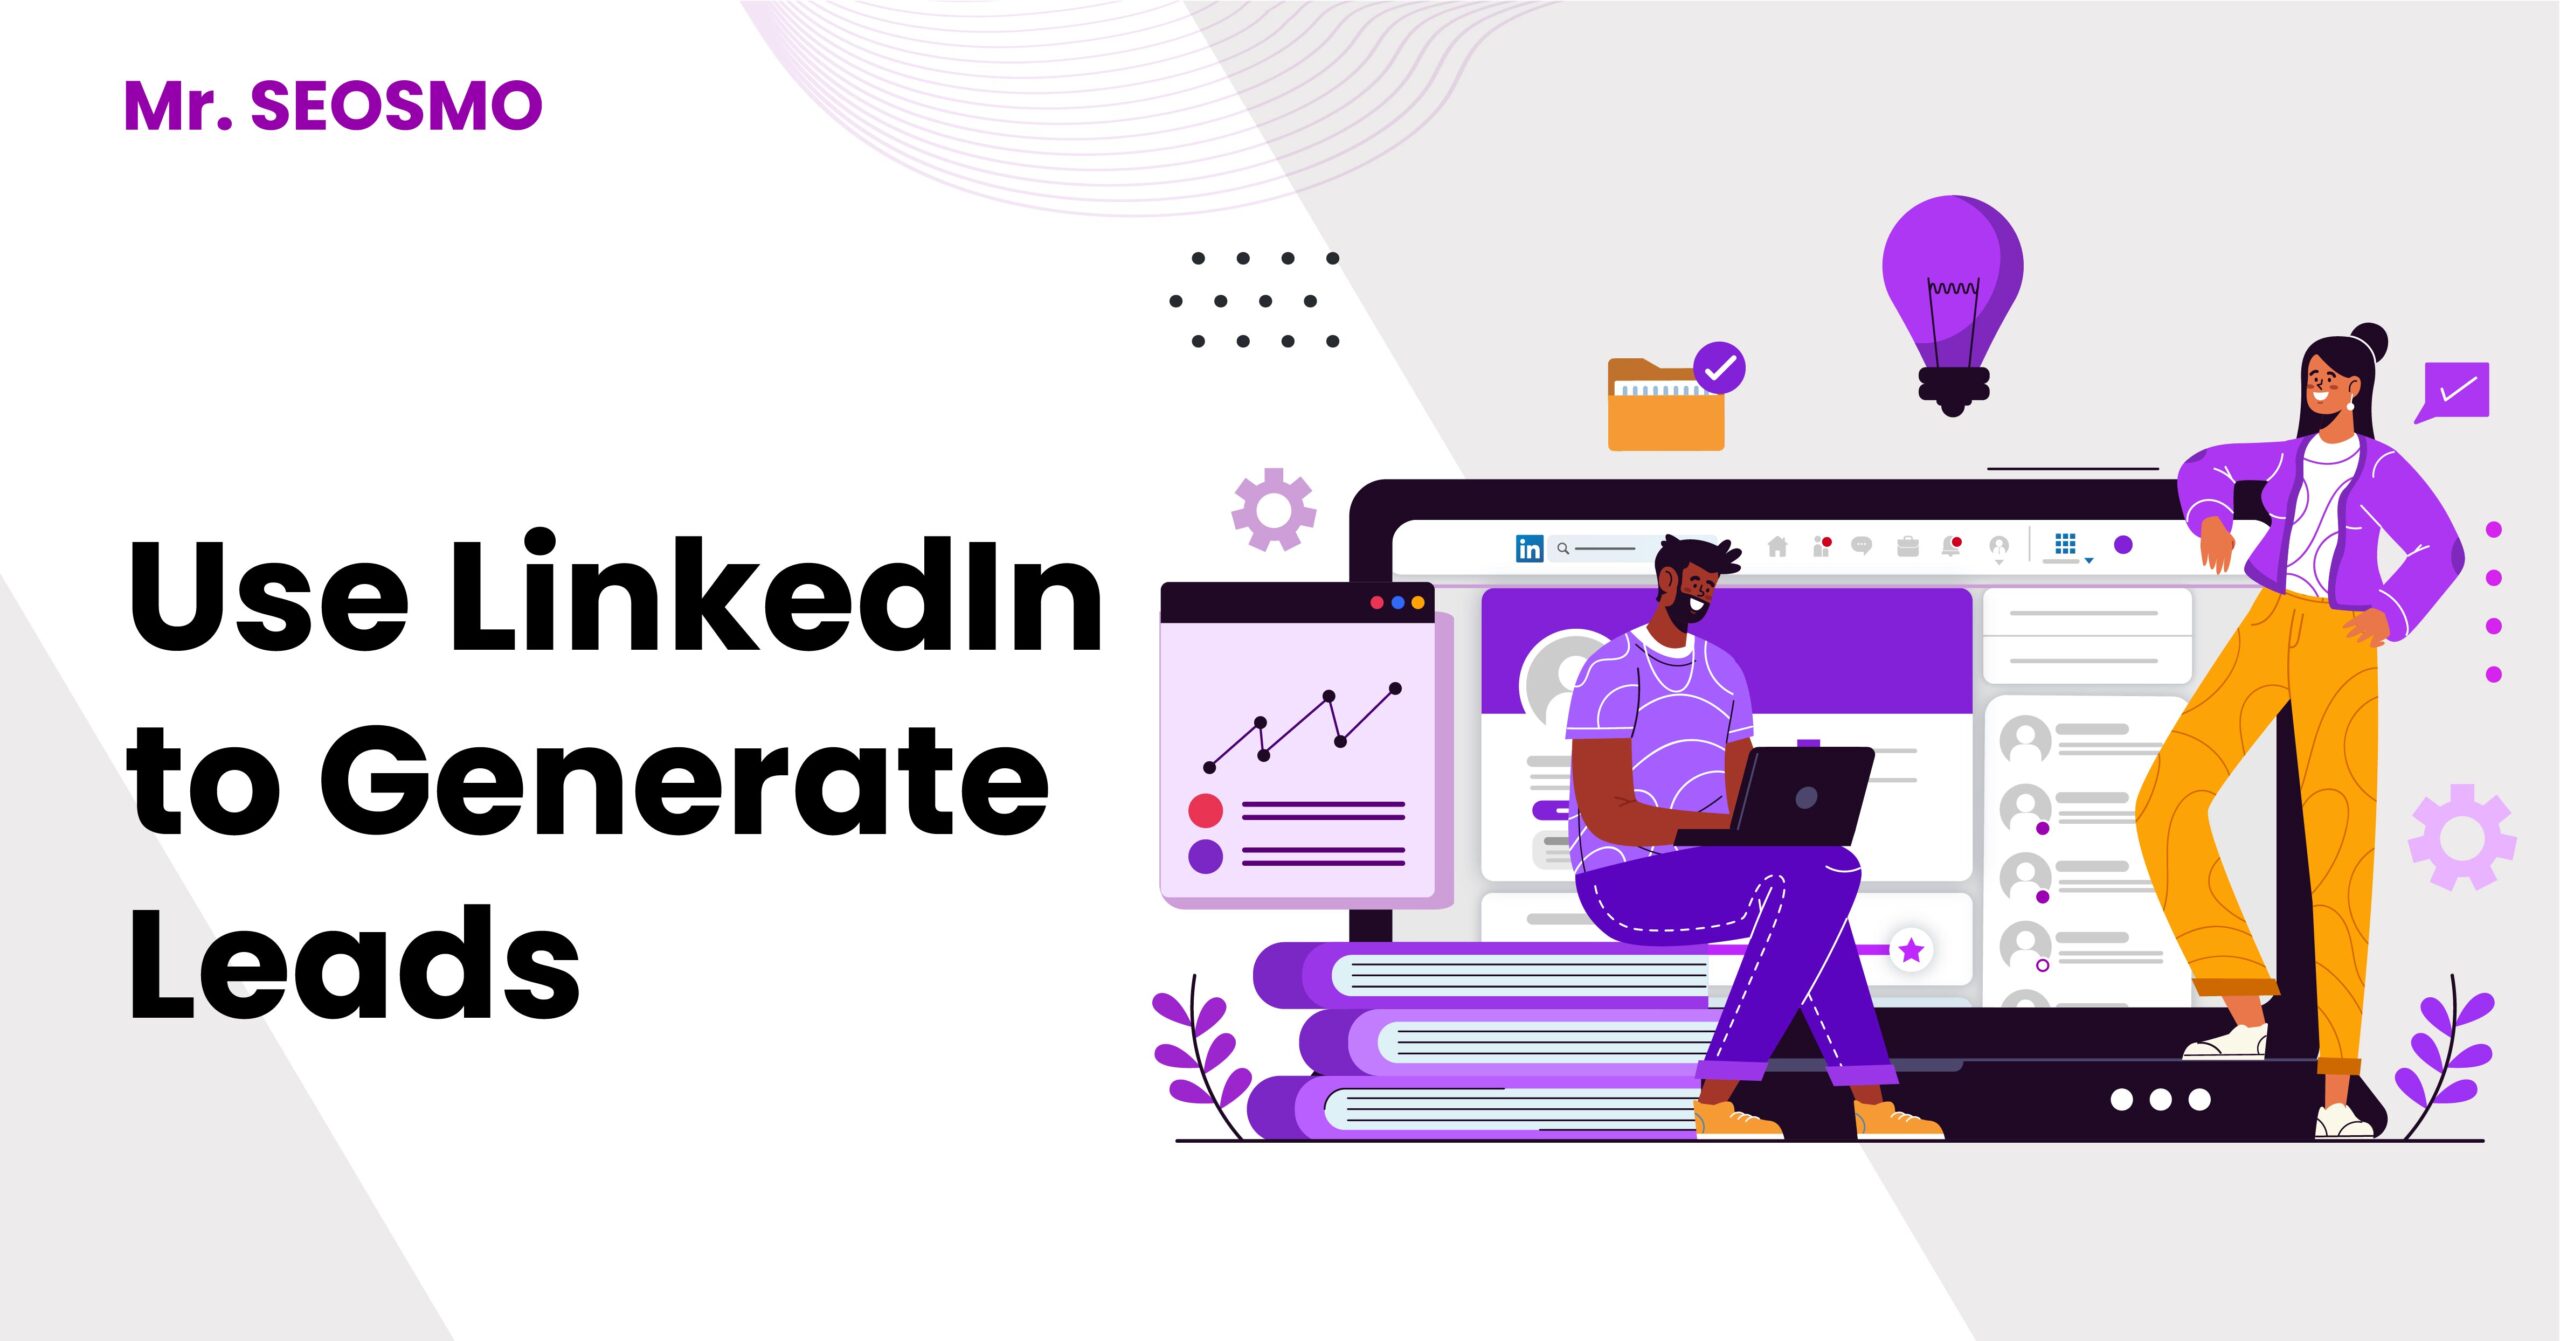 How to Use LinkedIn to Generate Leads